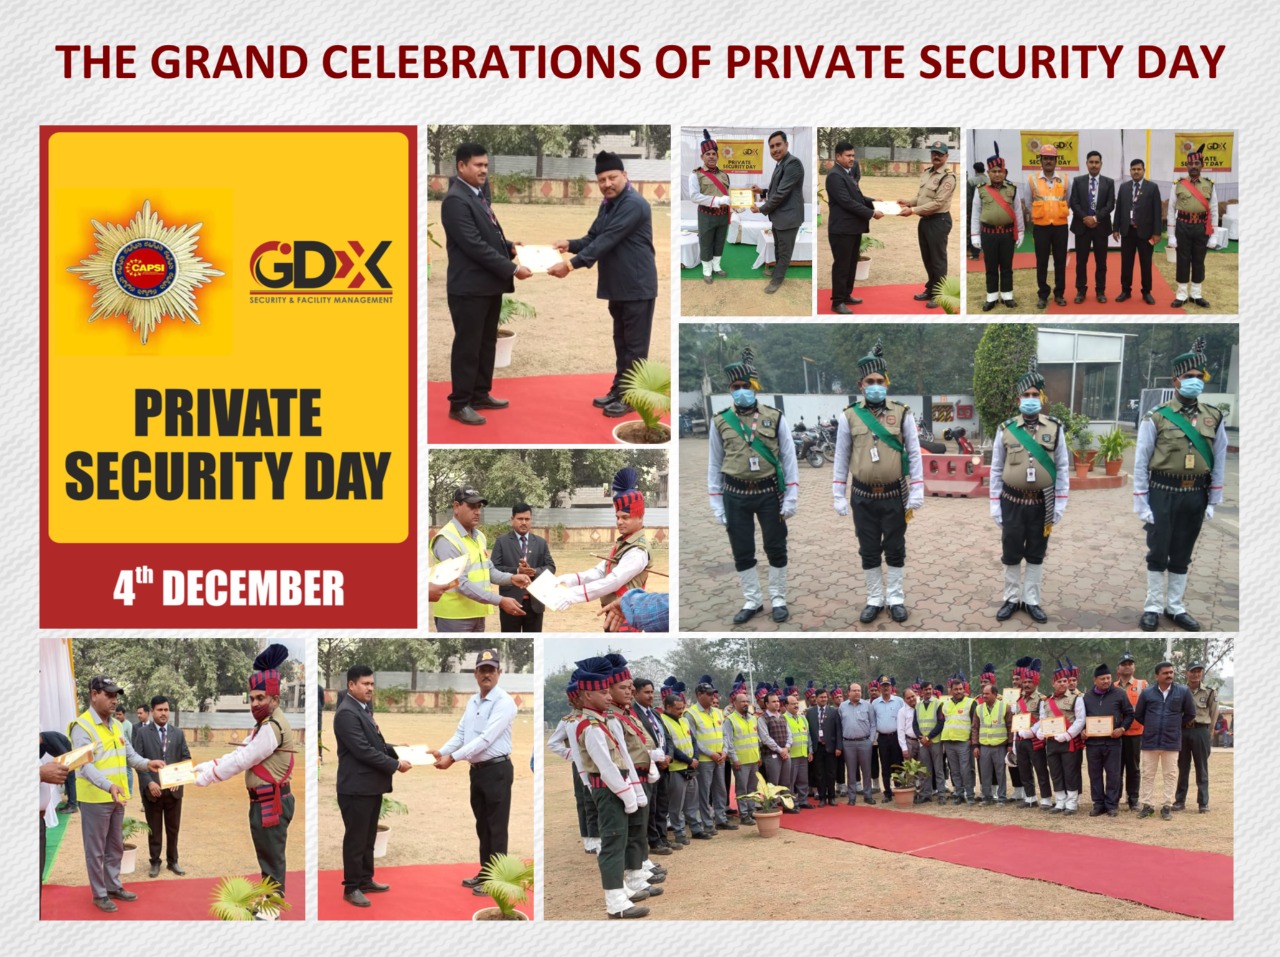 The Grand Celebrations of Private Security Day